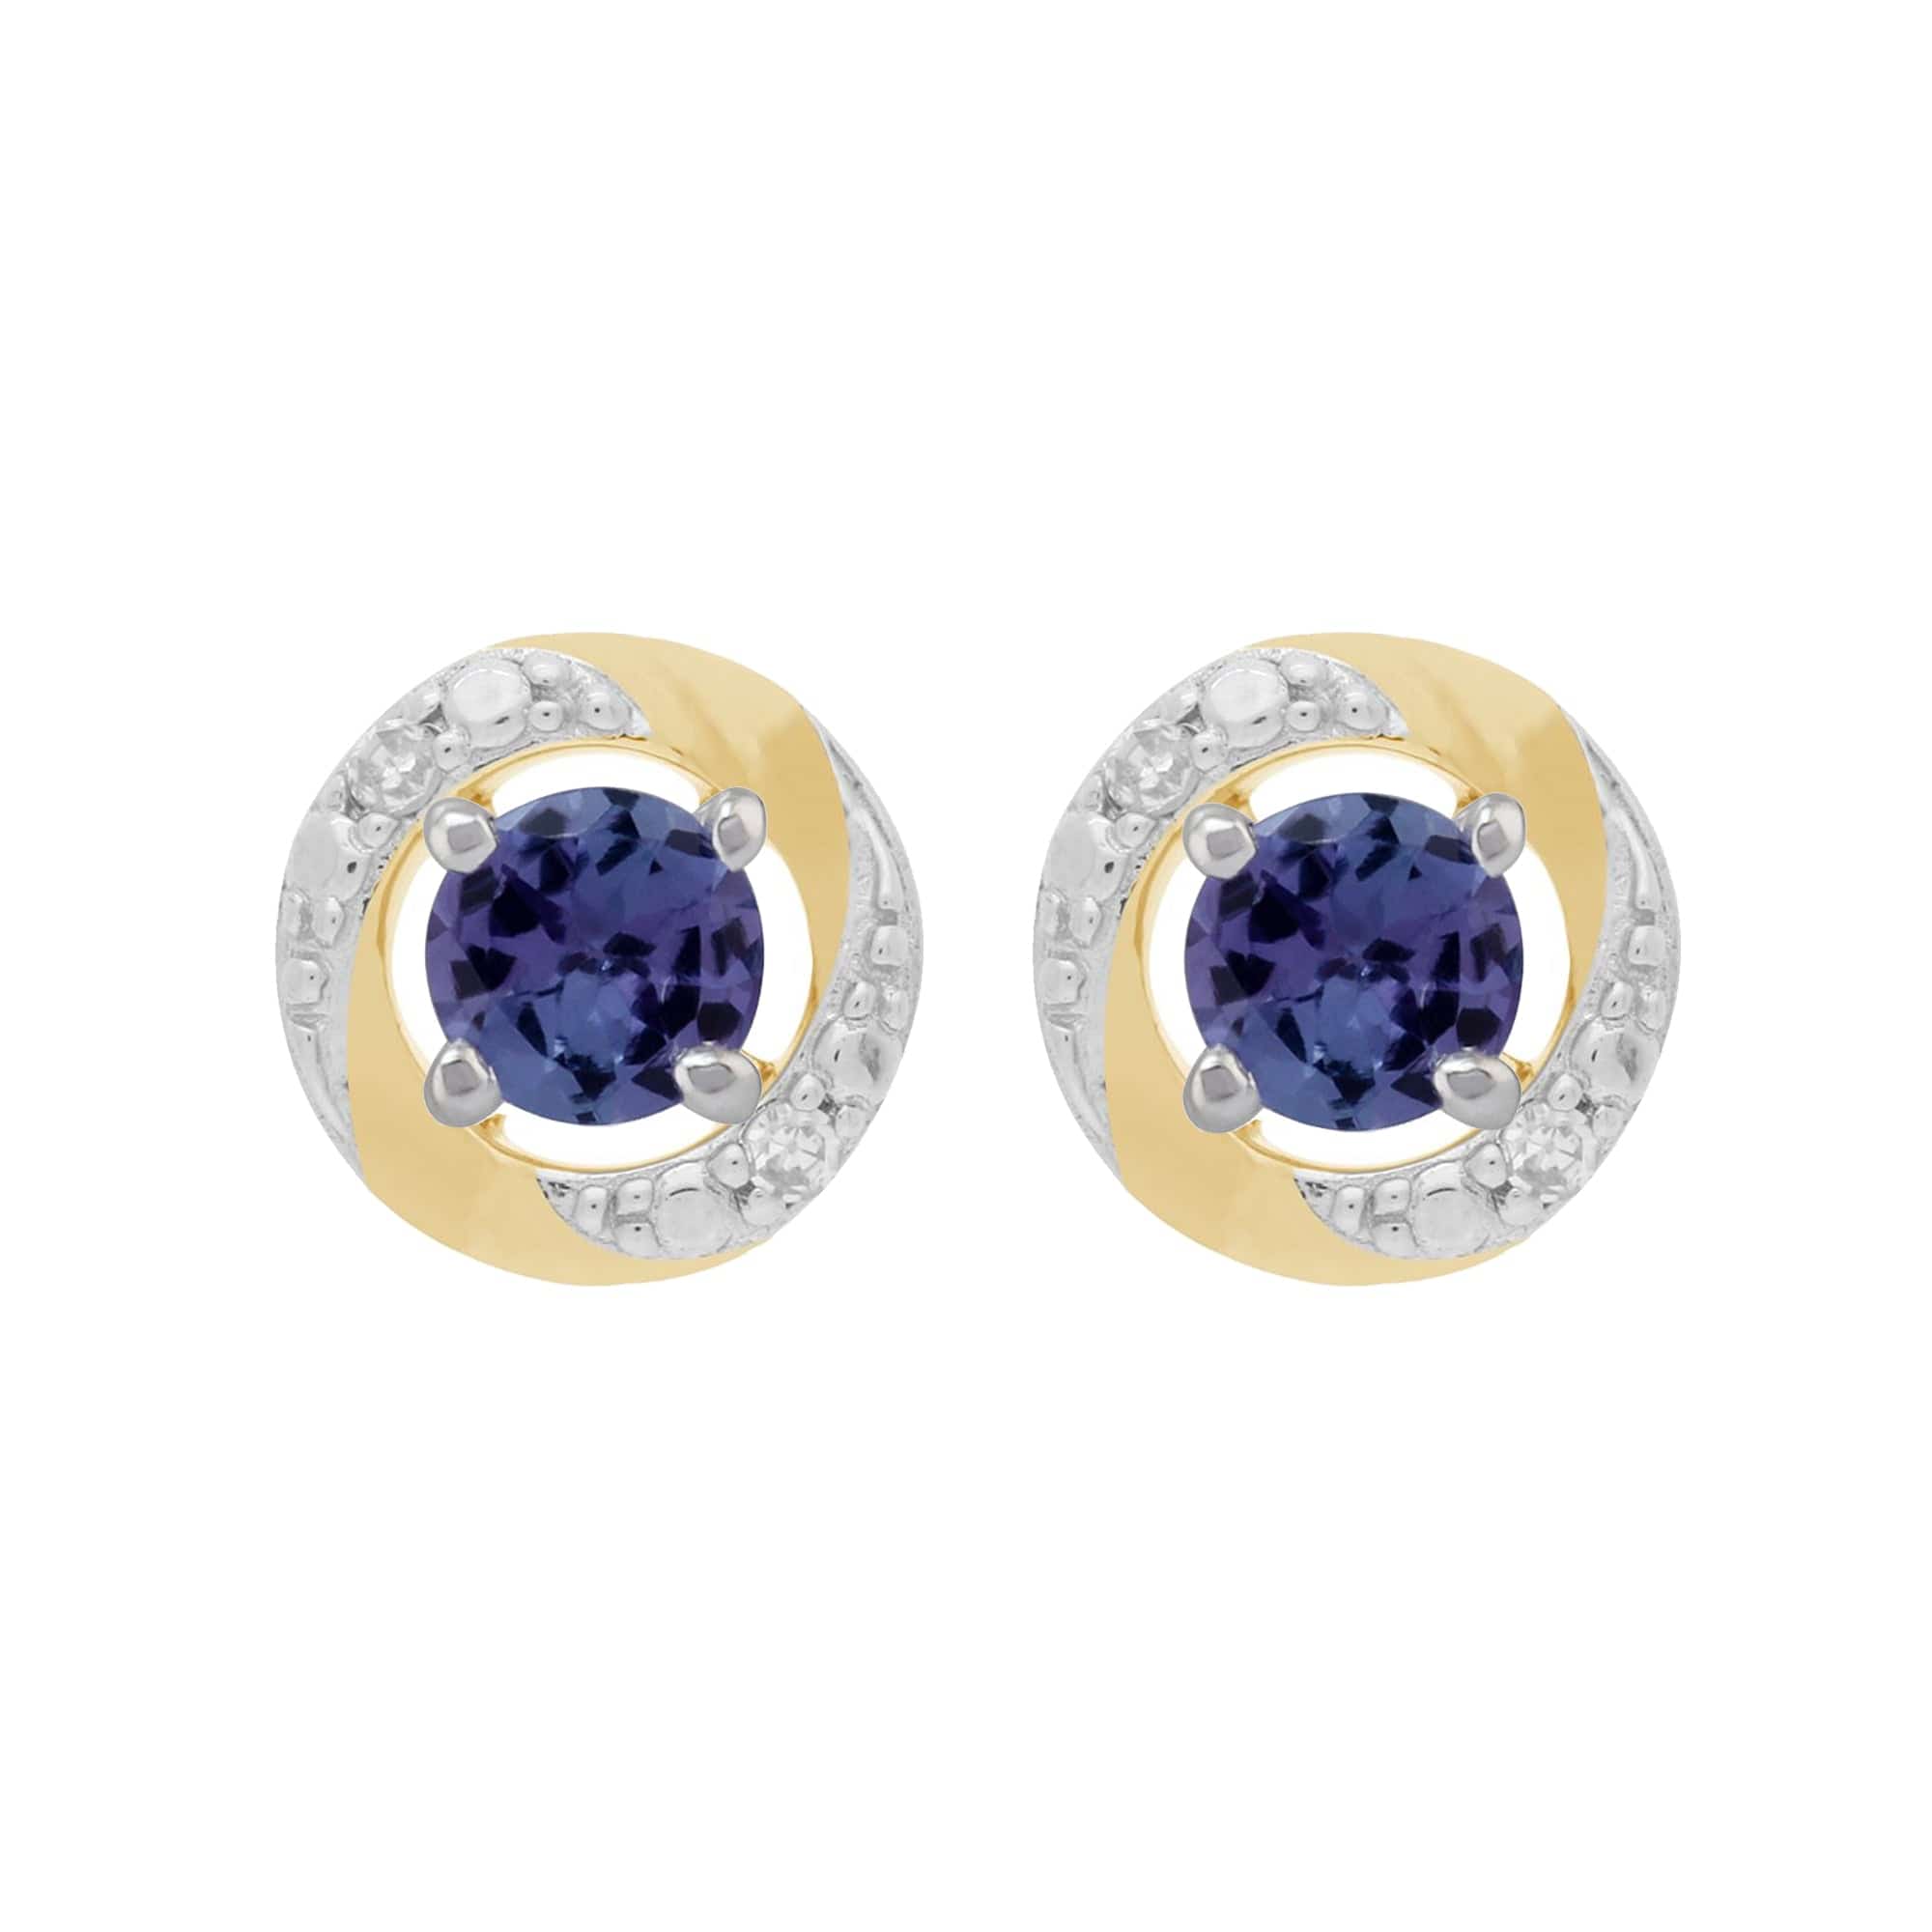 18937-191E0374019 9ct White Gold Tanzanite Stud Earrings with Detachable Diamond Halo Ear Jacket in 9ct Yellow Gold 1